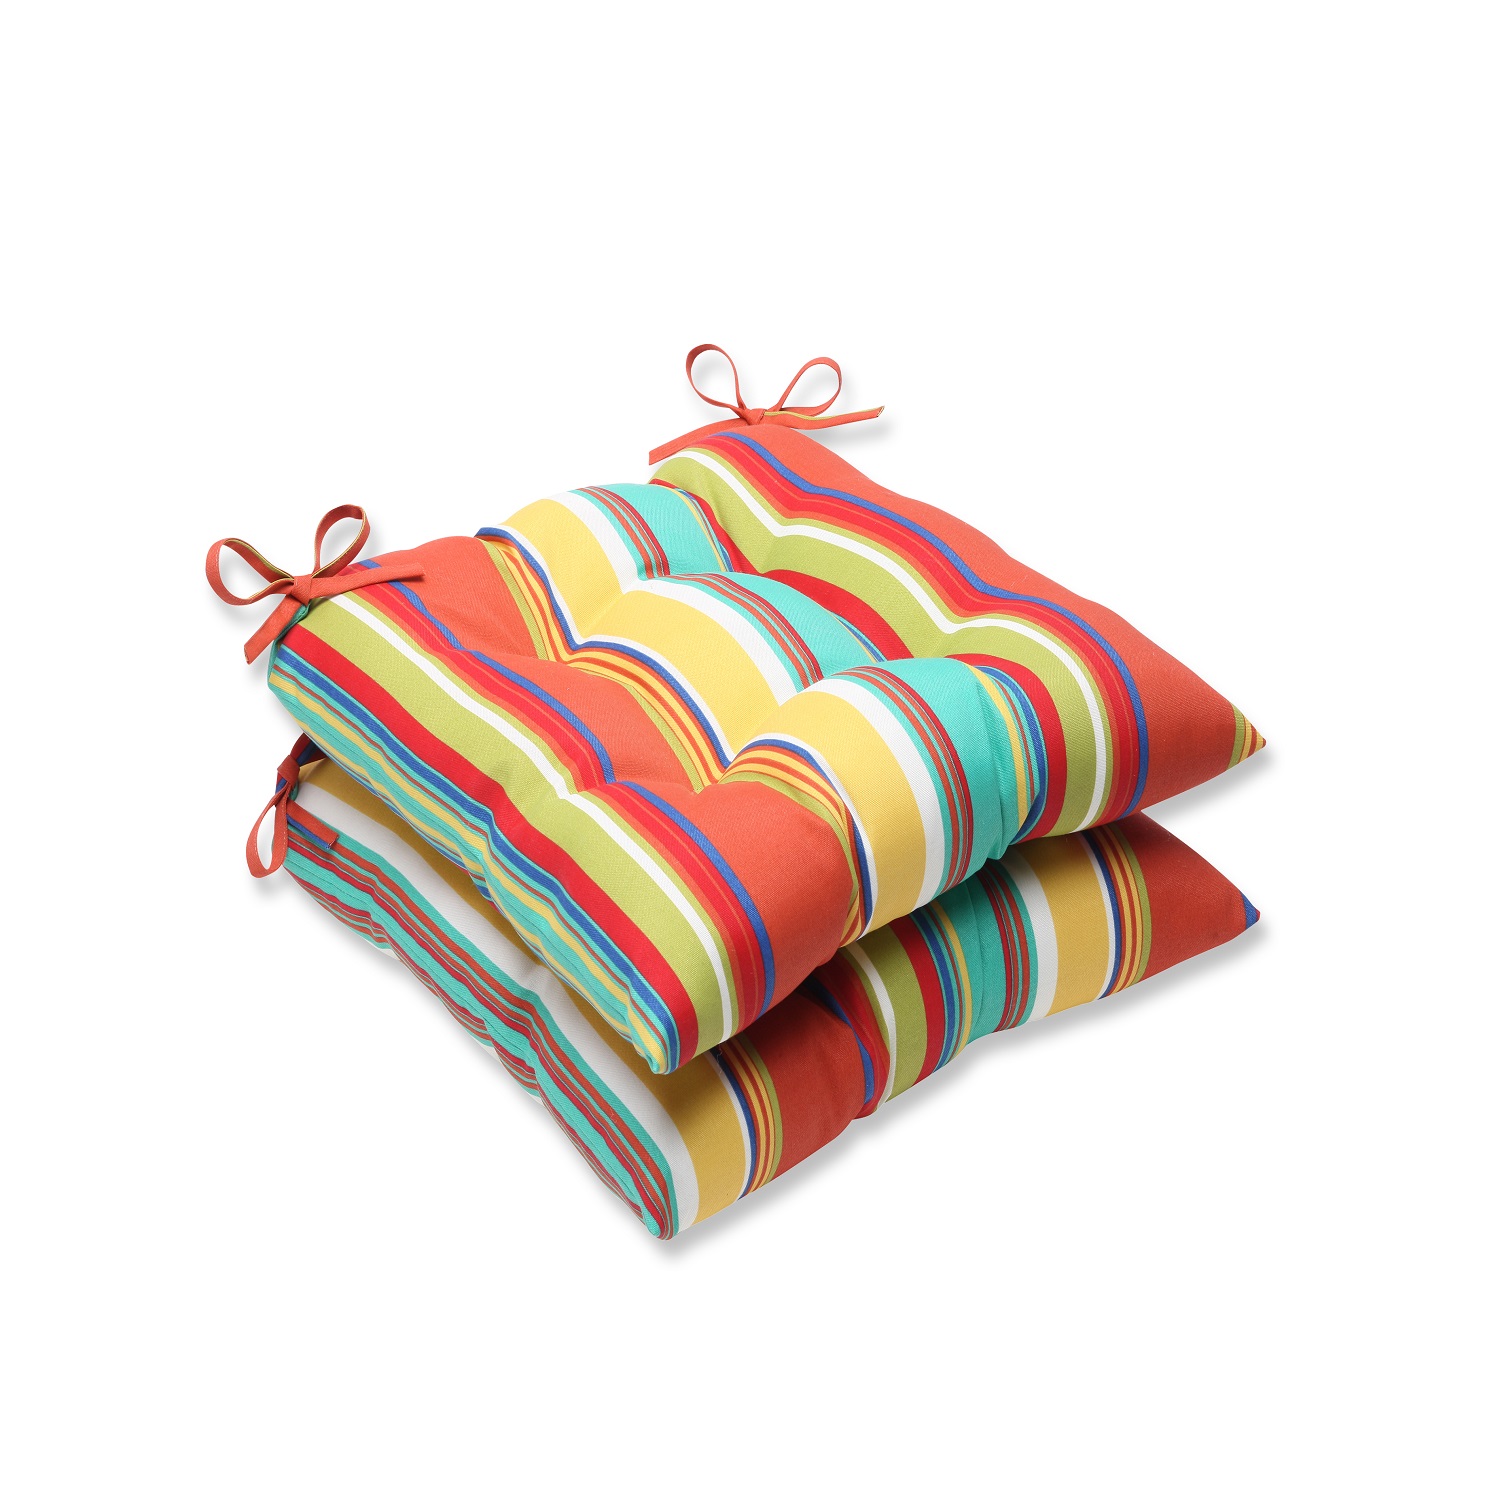 CC Outdoor Living Set of 2 Multicolored Striped Square Seat Cushion 19"